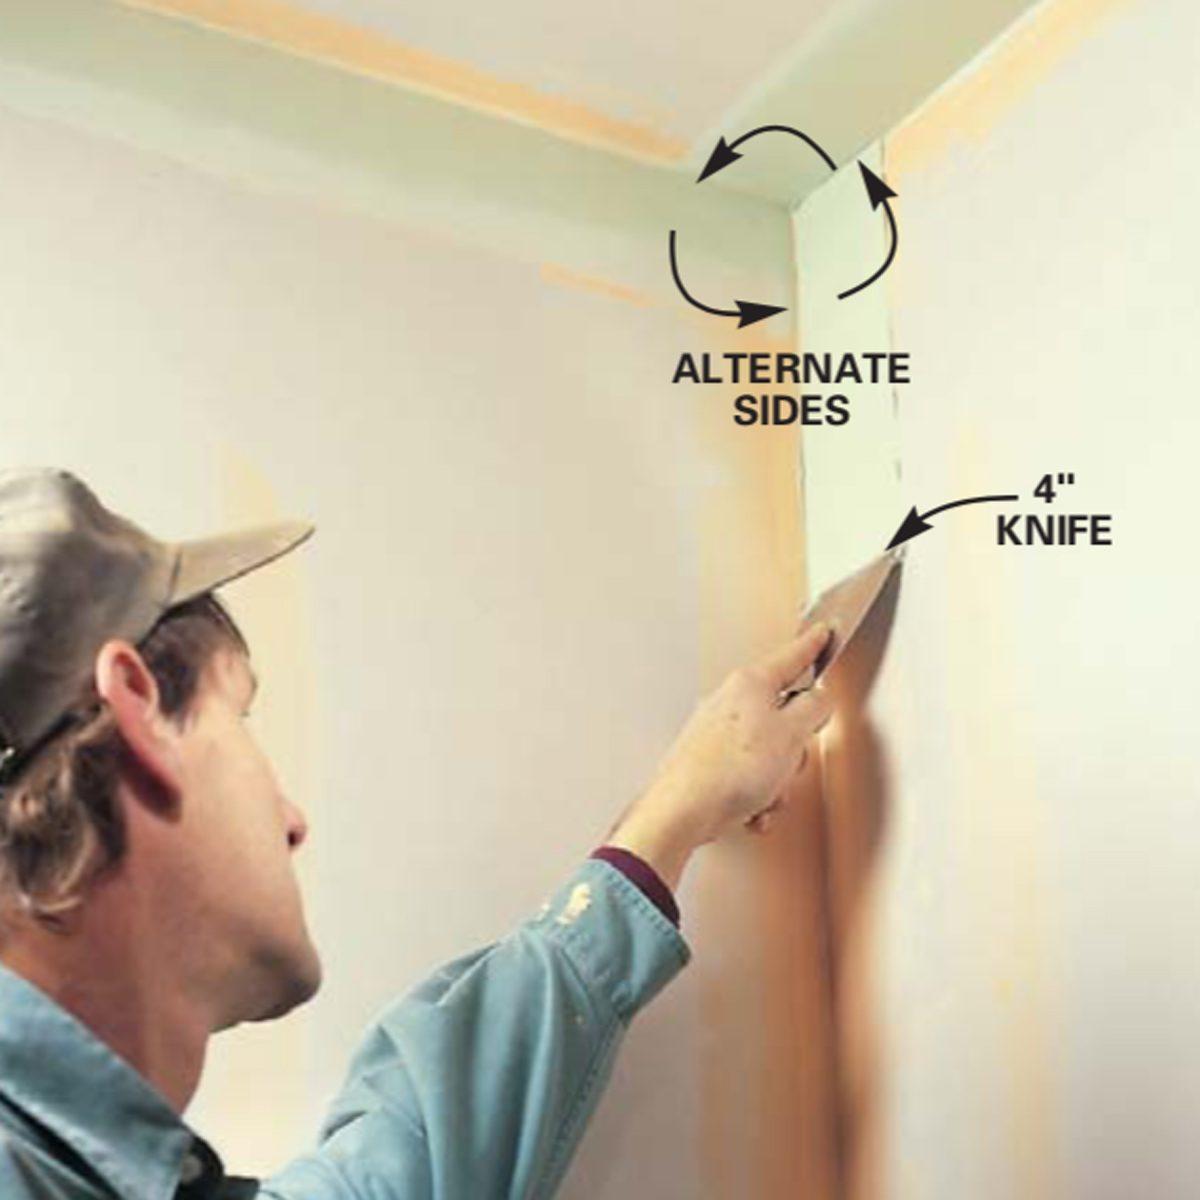 How to Tape Drywall Like a Pro: Expert Tips Using Drywall Mud Tools (DIY)